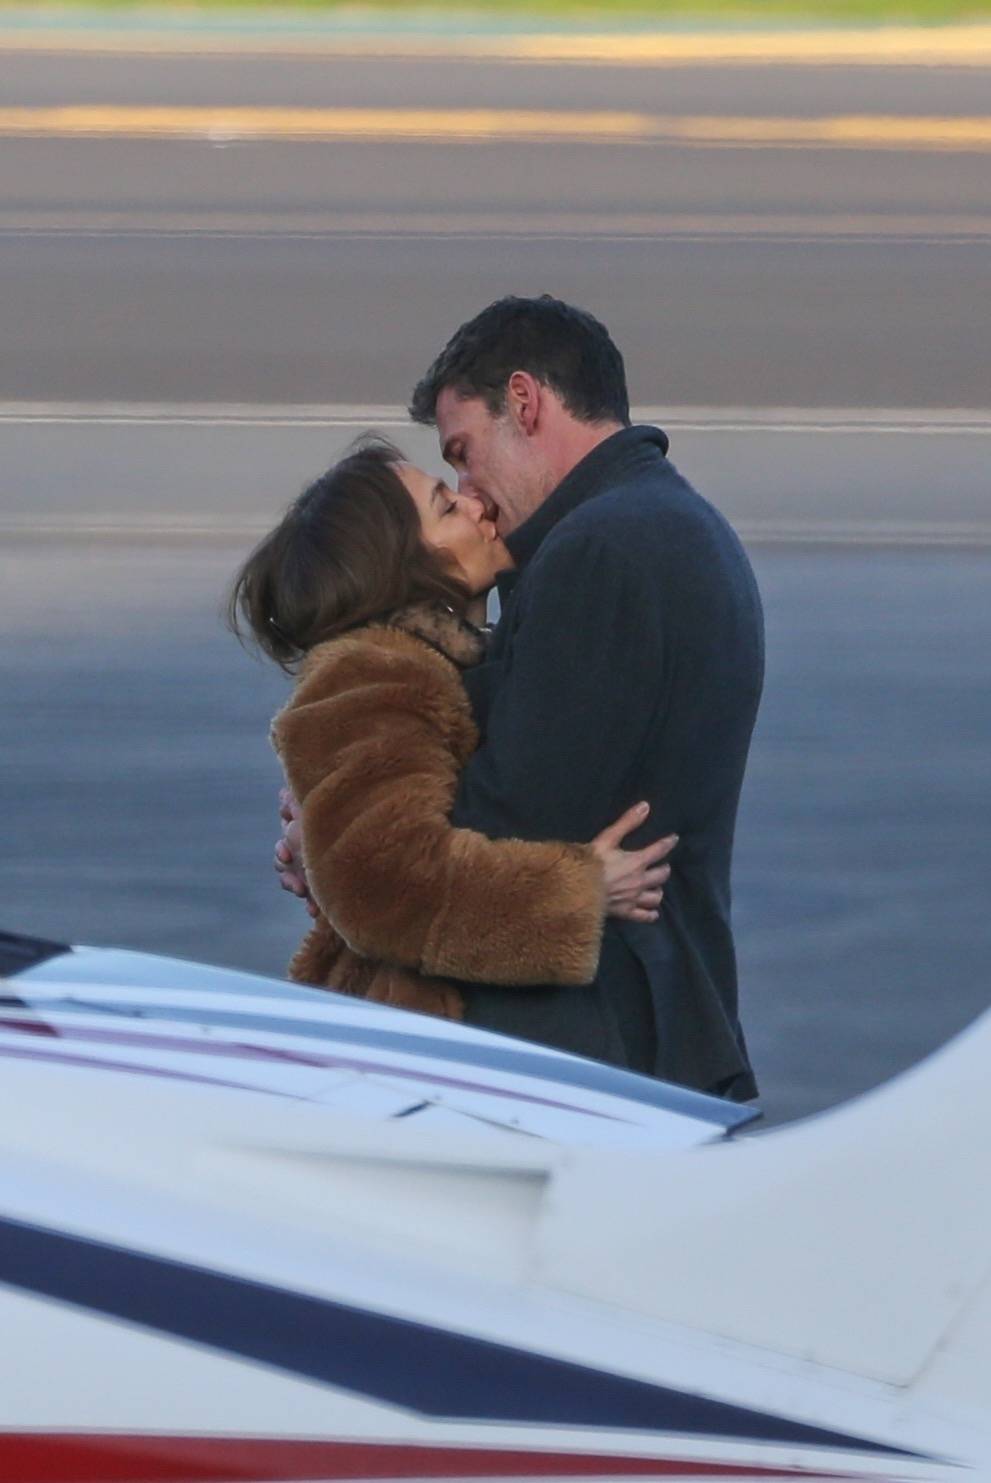 *EXCLUSIVE* Ben Affleck and Jennifer Lopez pack on the PDA as her pilot waits ahead of a flight out of LA